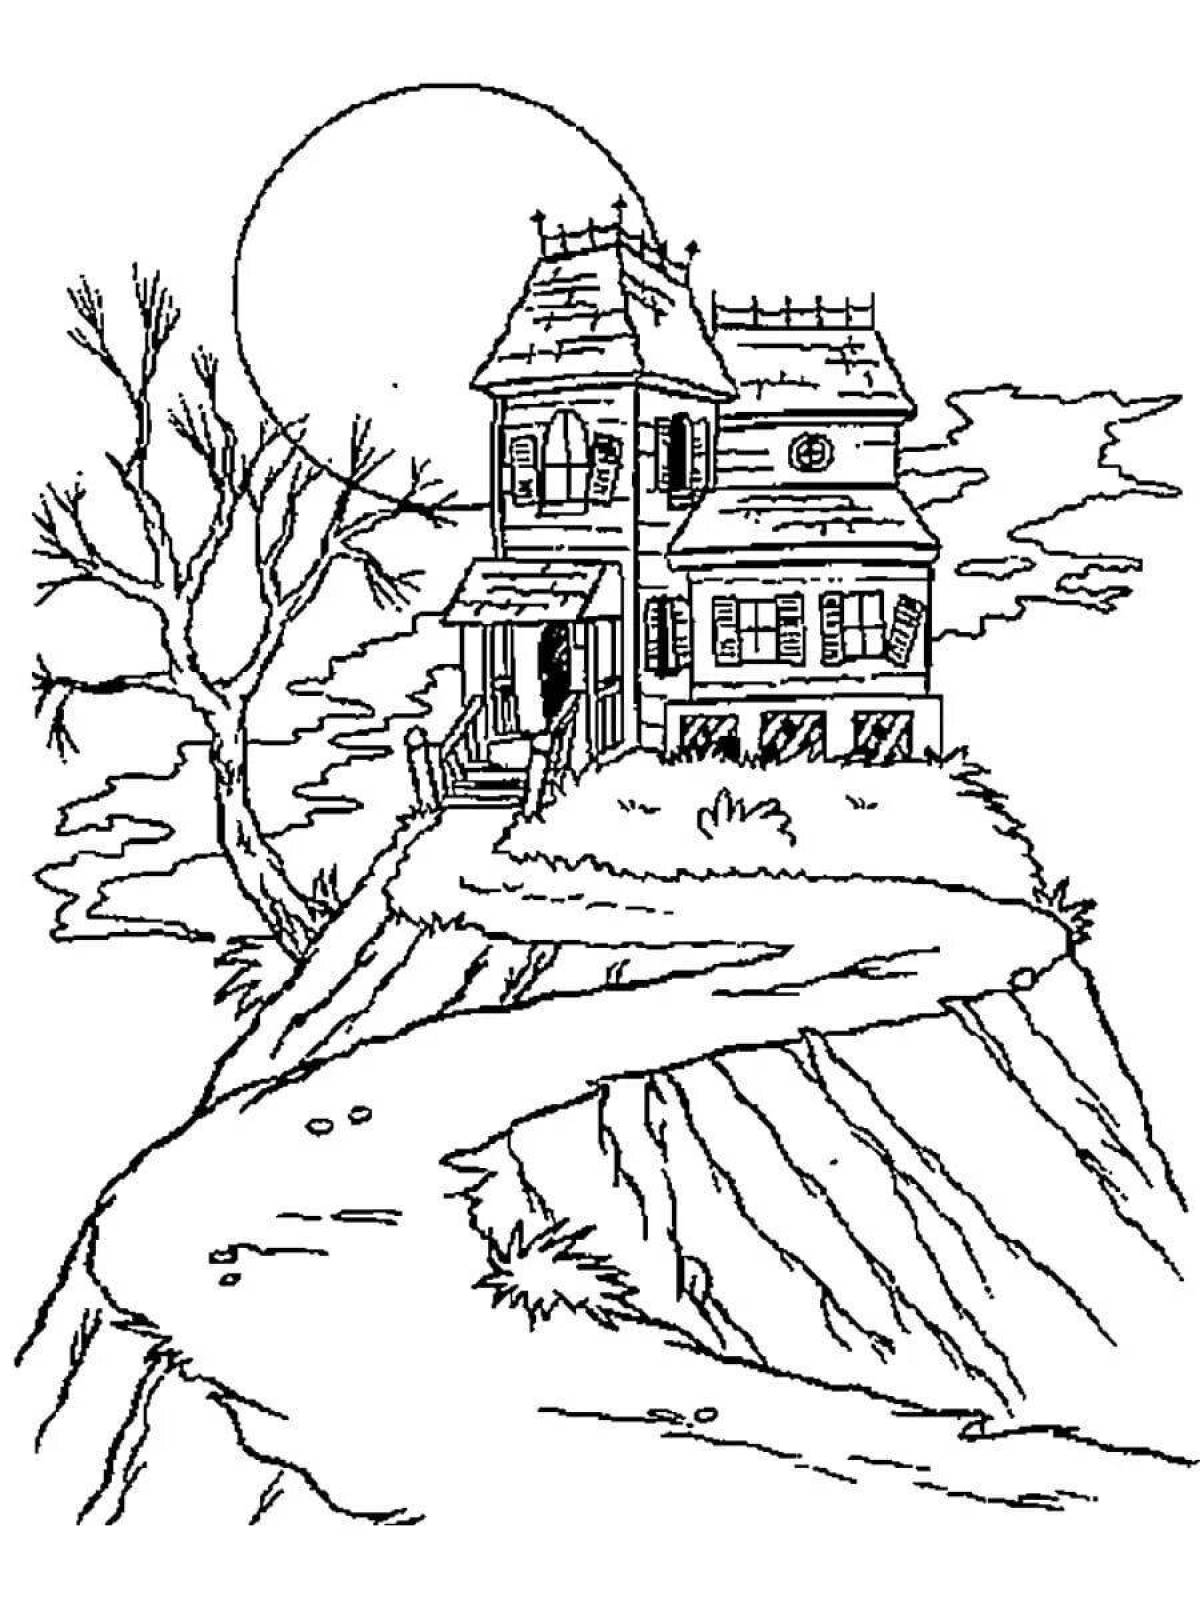 Nerving gloomy house coloring page